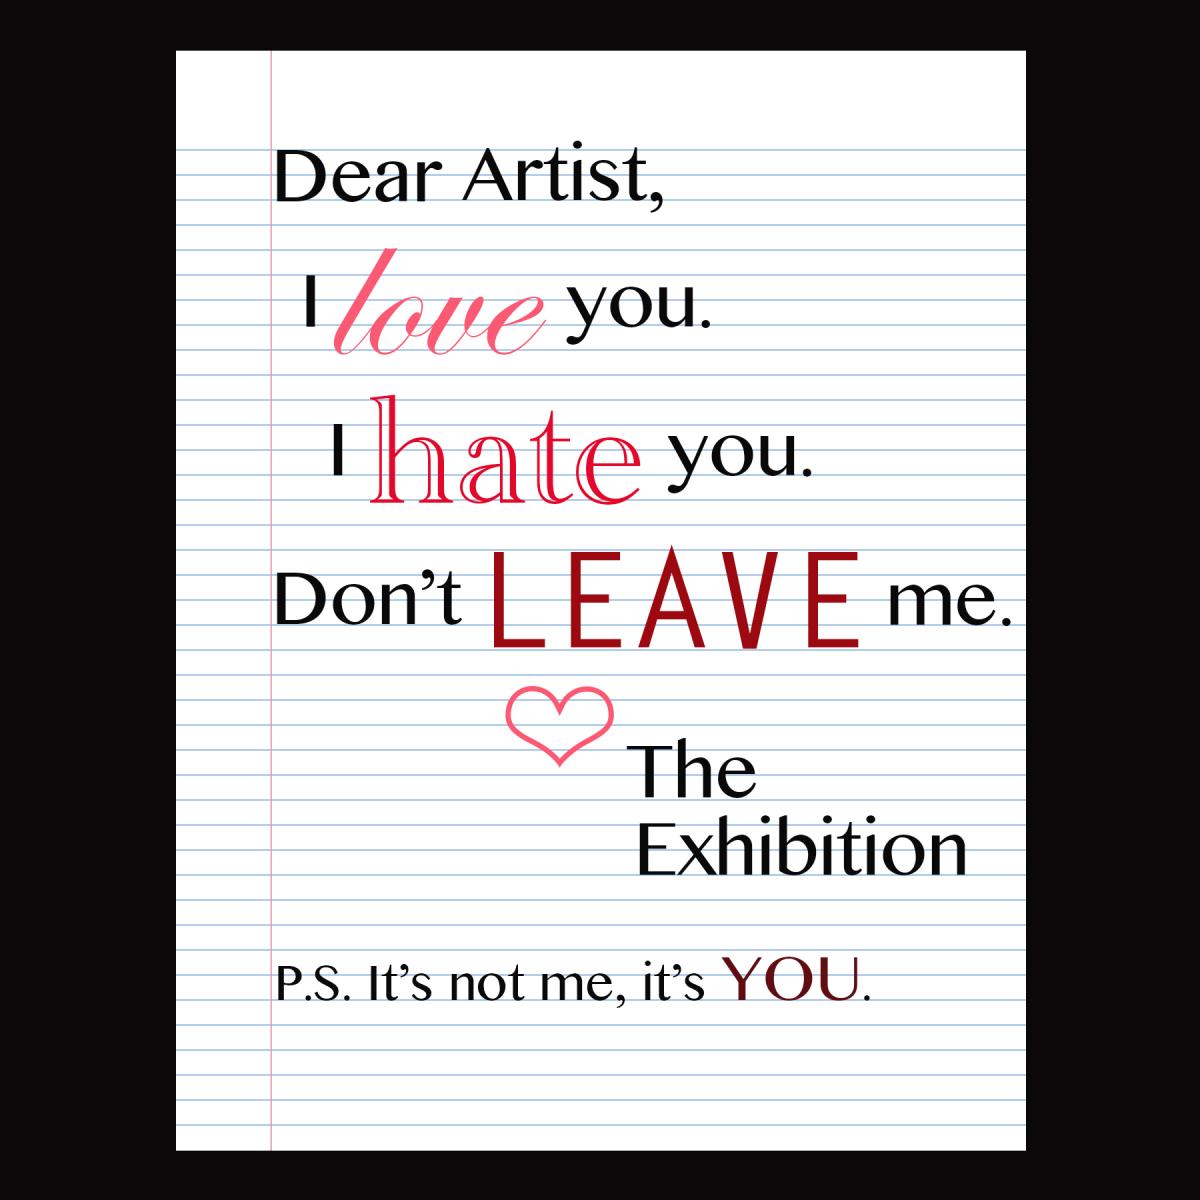 Calling all artists for “I Love You. I Hate You. Don't Leave Me ...